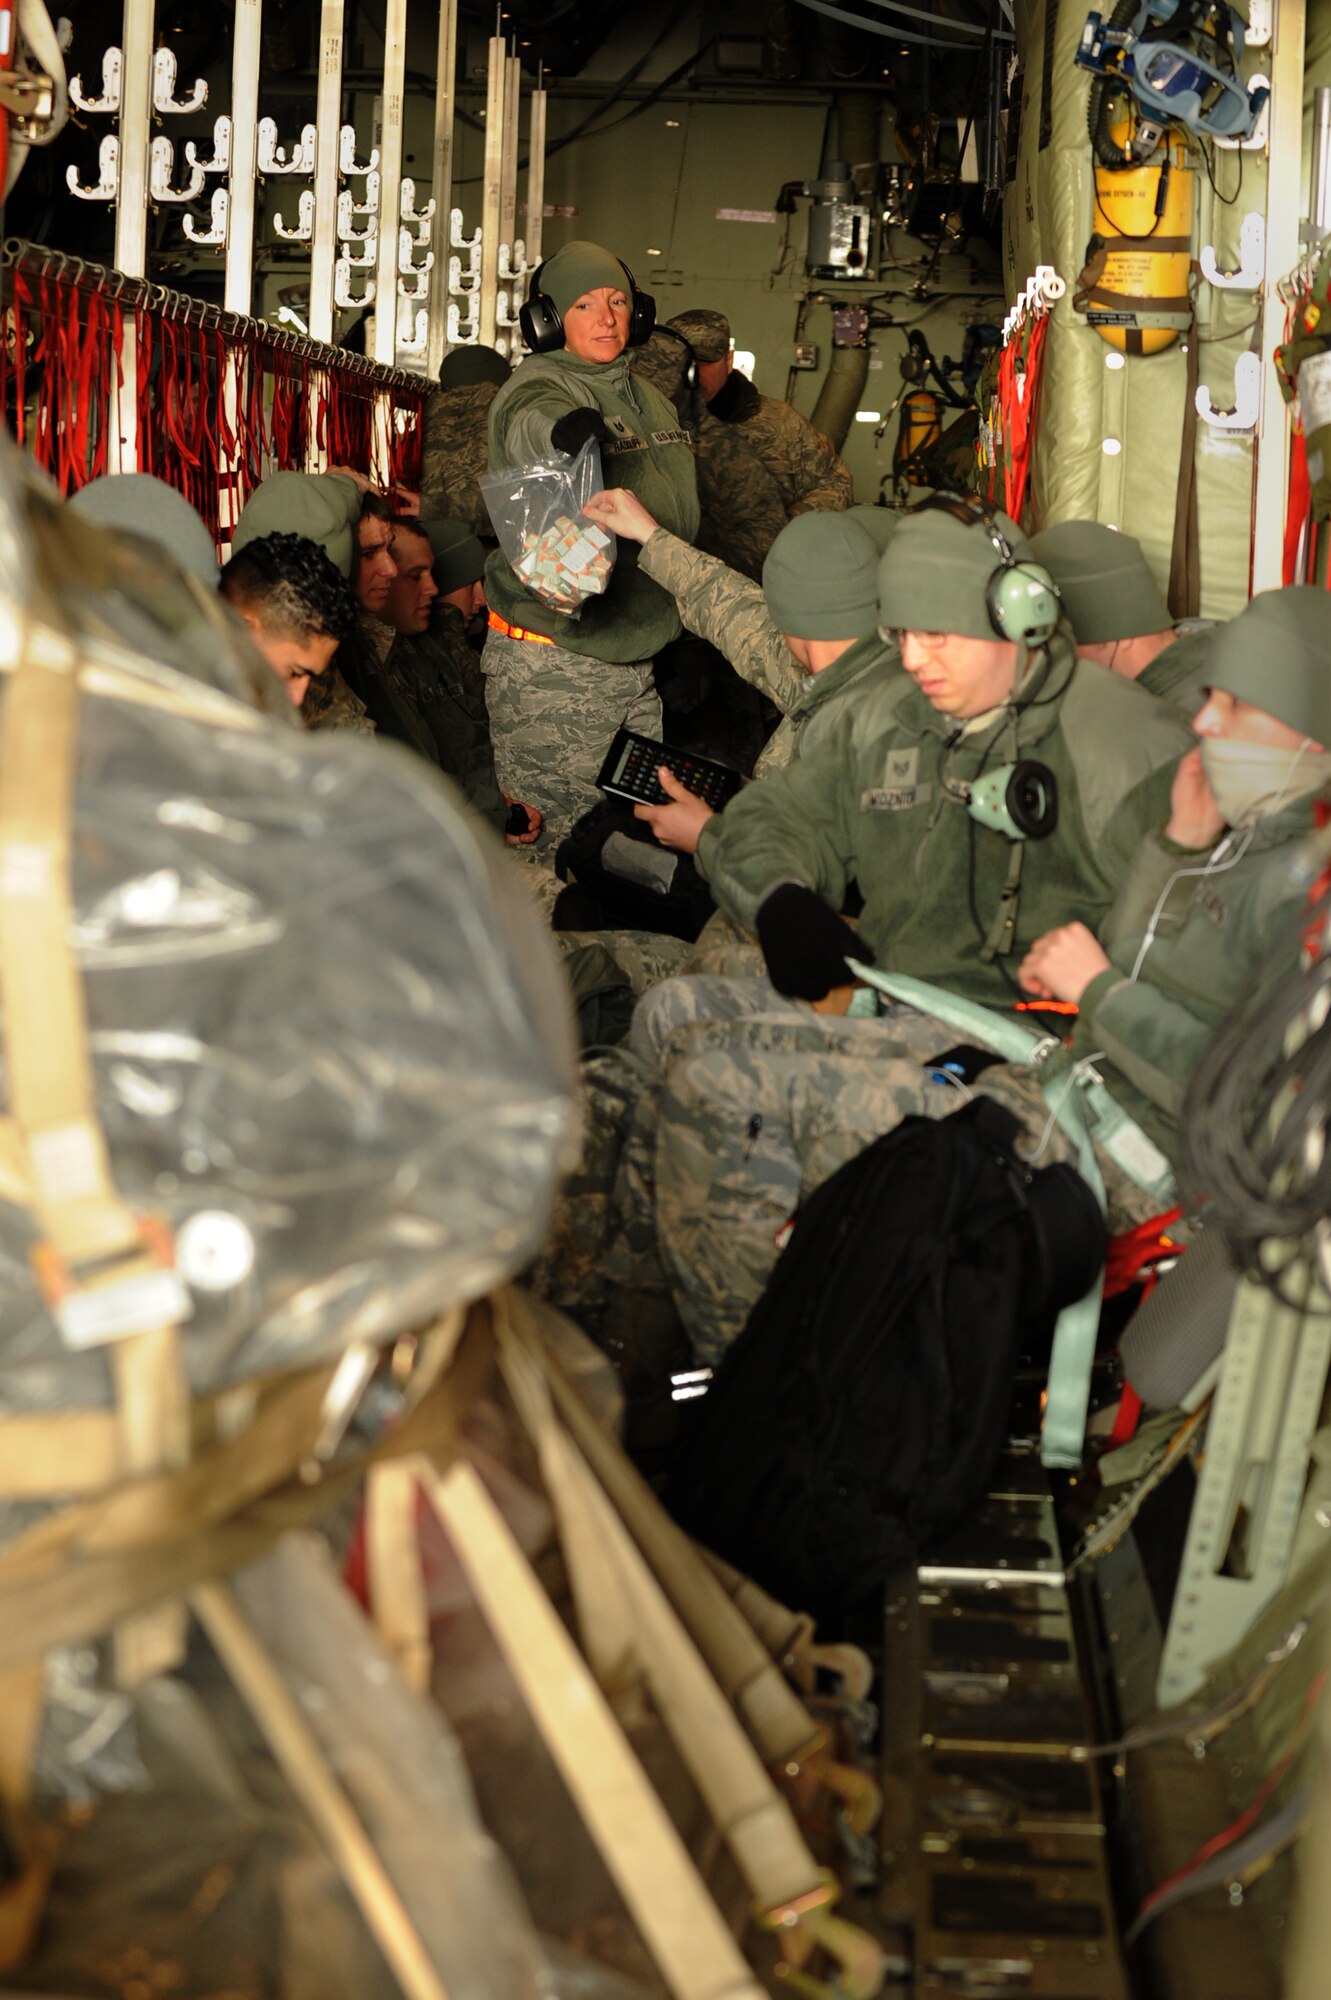 SPANGDAHLEM AIR BASE, Germany – Airmen from the 52nd Fighter Wing are briefed safety procedures aboard a C-130 Hercules here Feb. 27 prior to their flight to Turkey in support of Anatolian Falcon 2012, a weapons training deployment that includes interdiction, attack, air superiority, defense suppression, airlift, air refueling and reconnaissance. More than 250 Airmen from the wing will participate in the exercise hosted at Turkish air force’s Konya Air Base. The U.S. and Turkish air forces will work together and improve both nations’ combat readiness through tactical training during the exercise. (U.S. Air Force photo by Airman 1st Class Matthew B. Fredericks/Released)